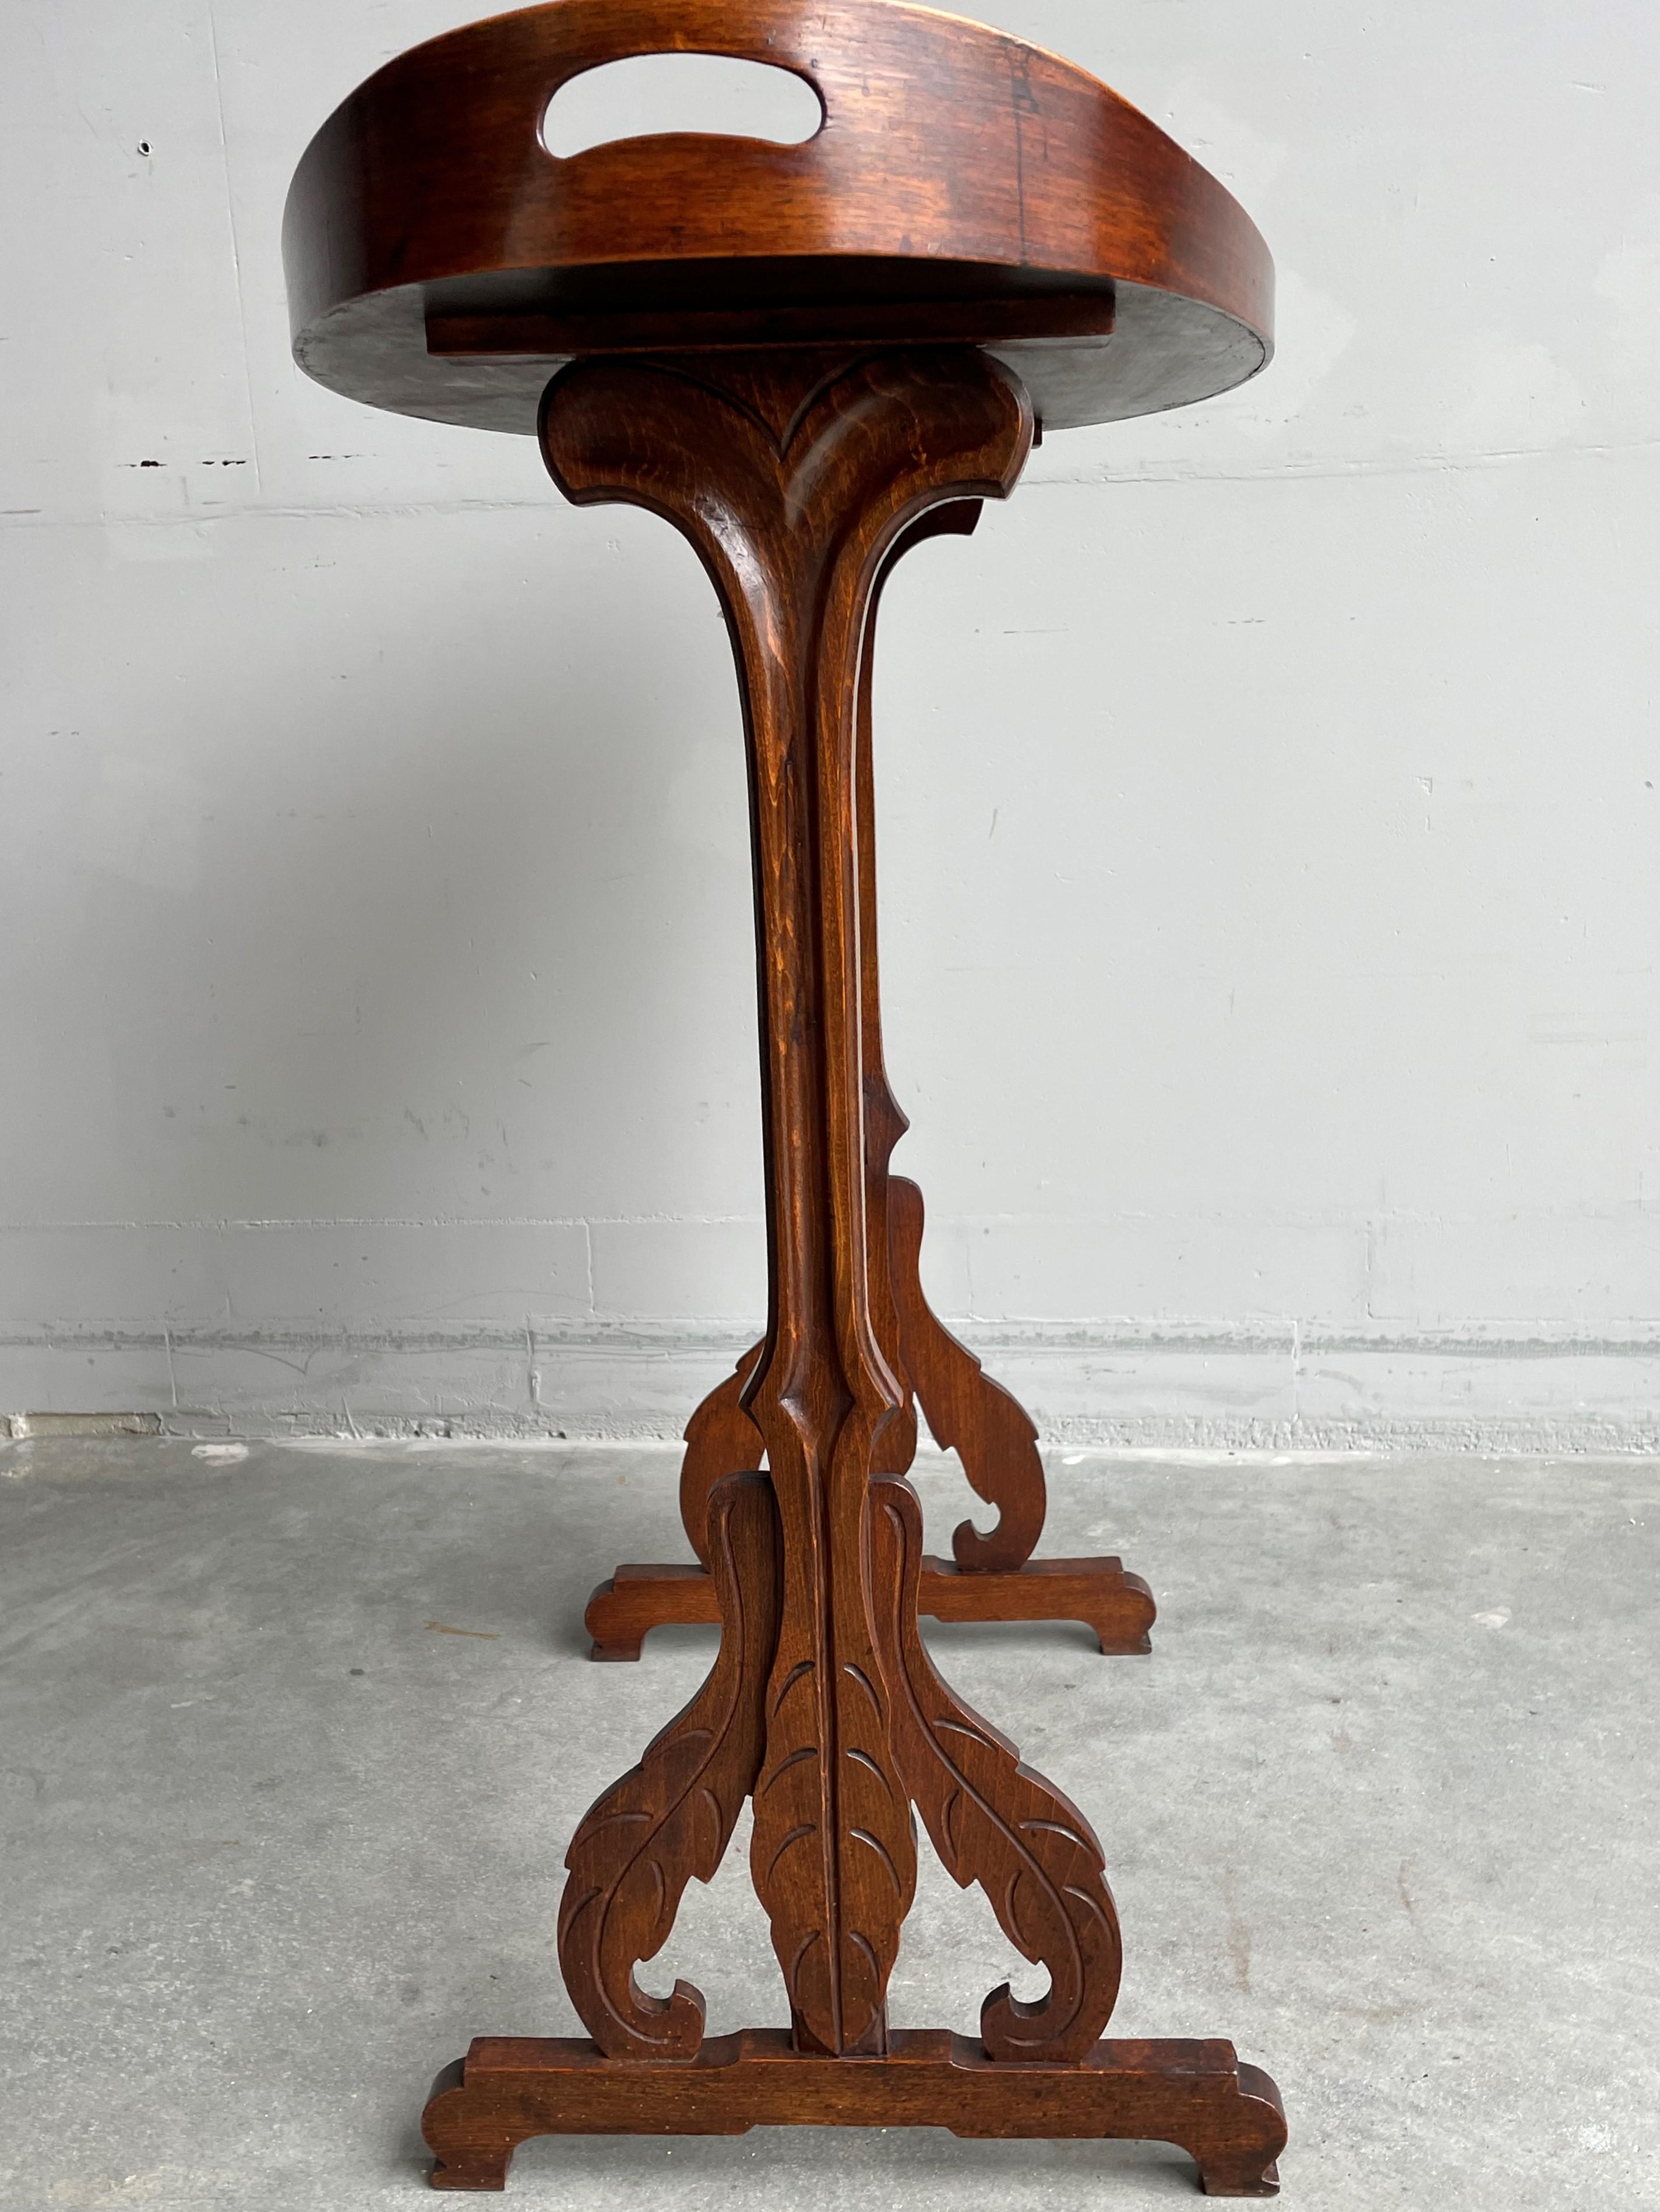 19th Century Emile Gallé Art Nouveau Tray Stand / Serving Table with Inlaid Flowers 1895-1903 For Sale